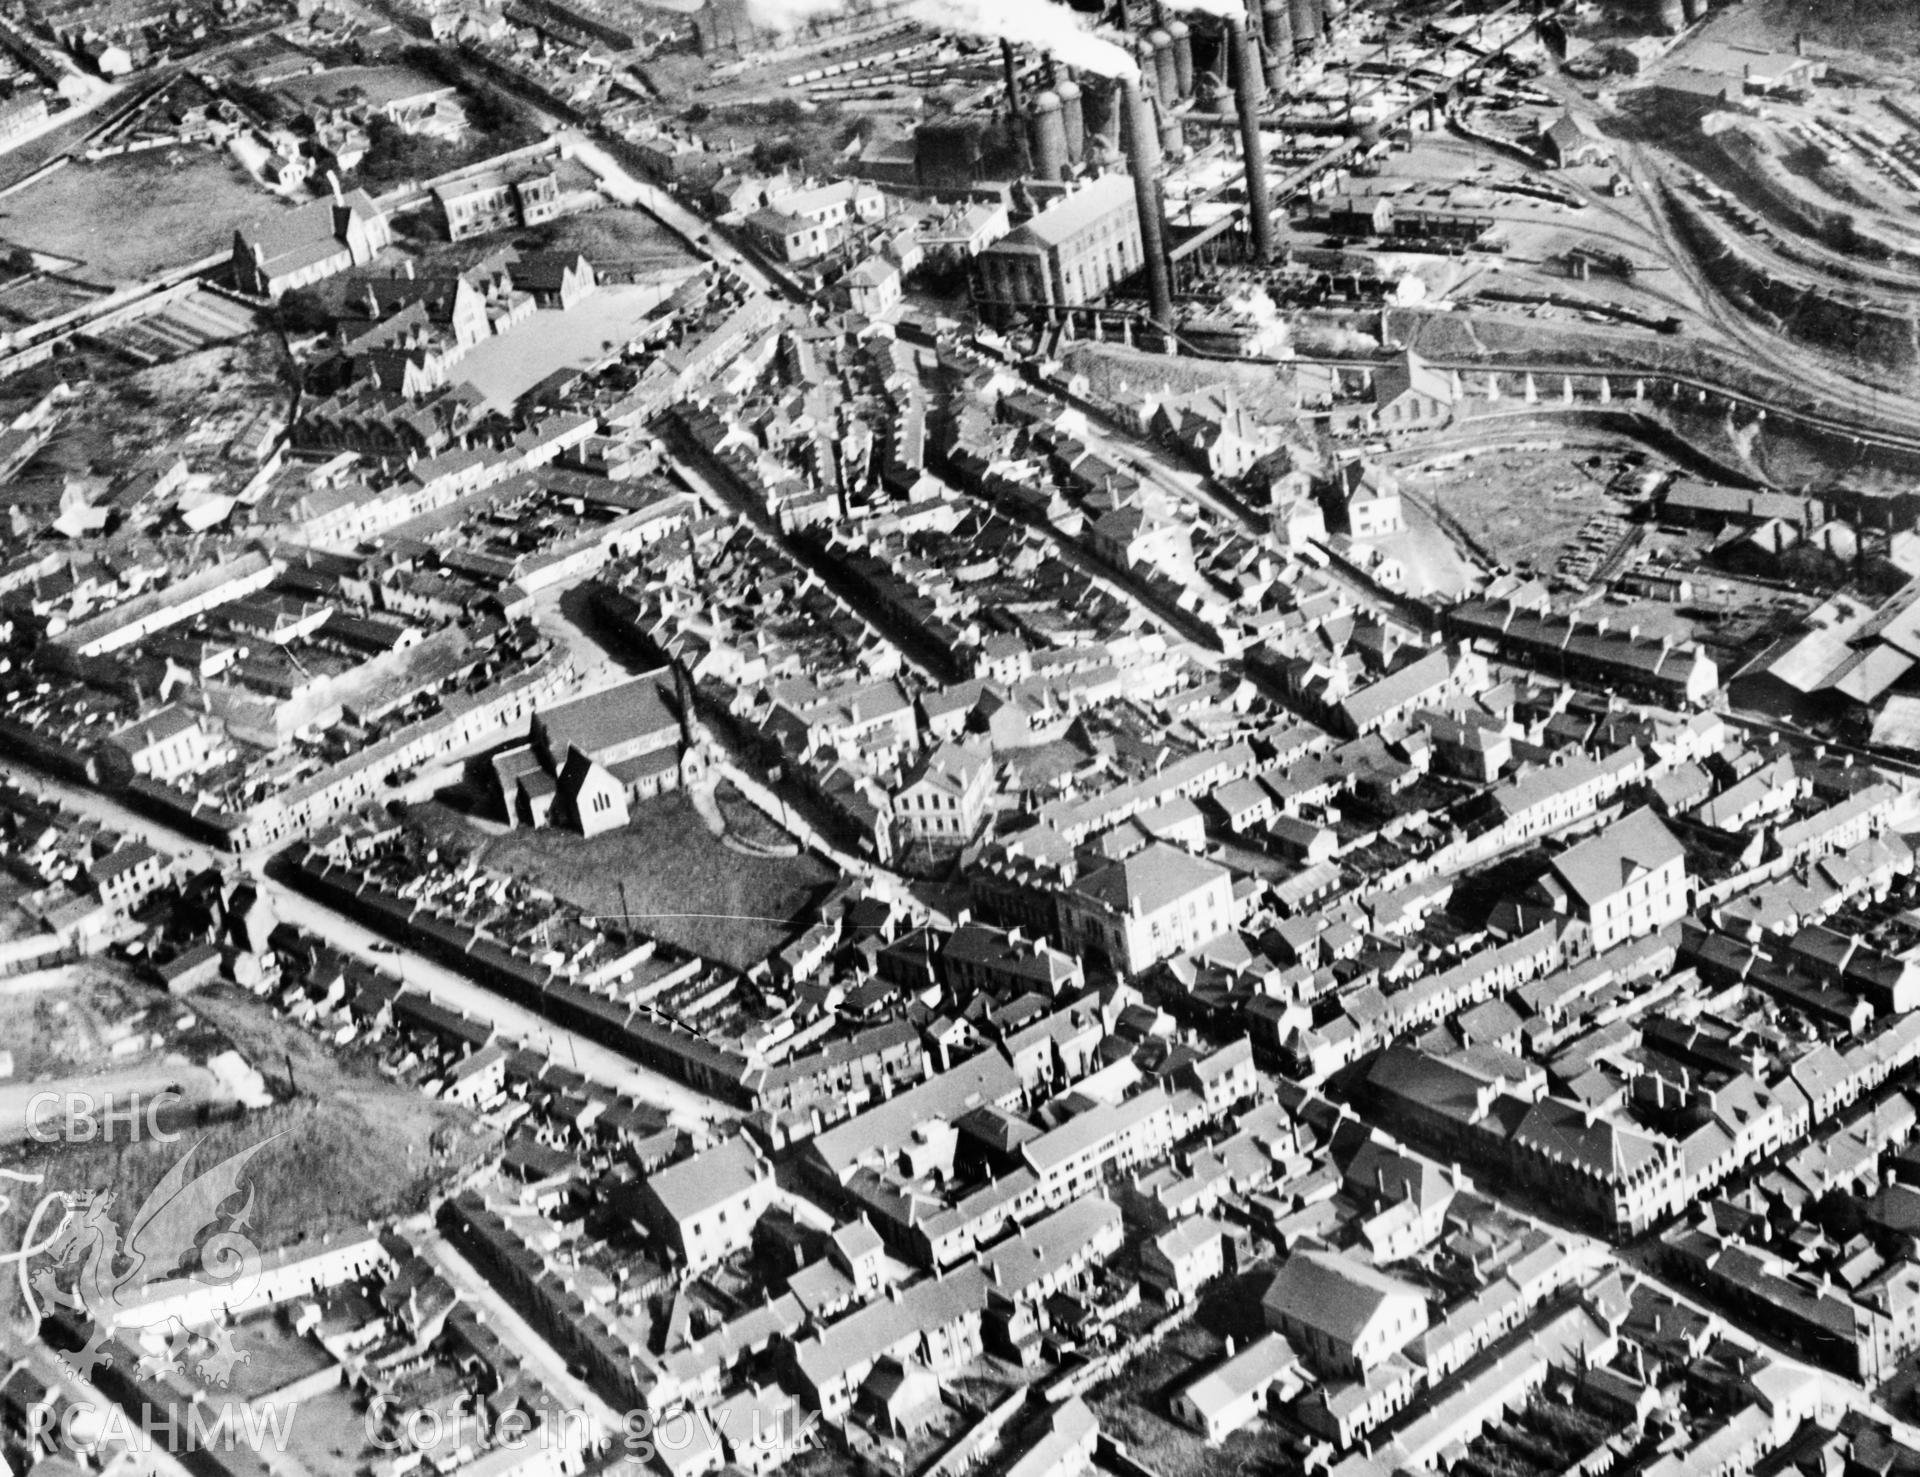 View of Merthyr Tydfil with Ironworks in background. Oblique aerial photograph, 5?x4? BW glass plate.